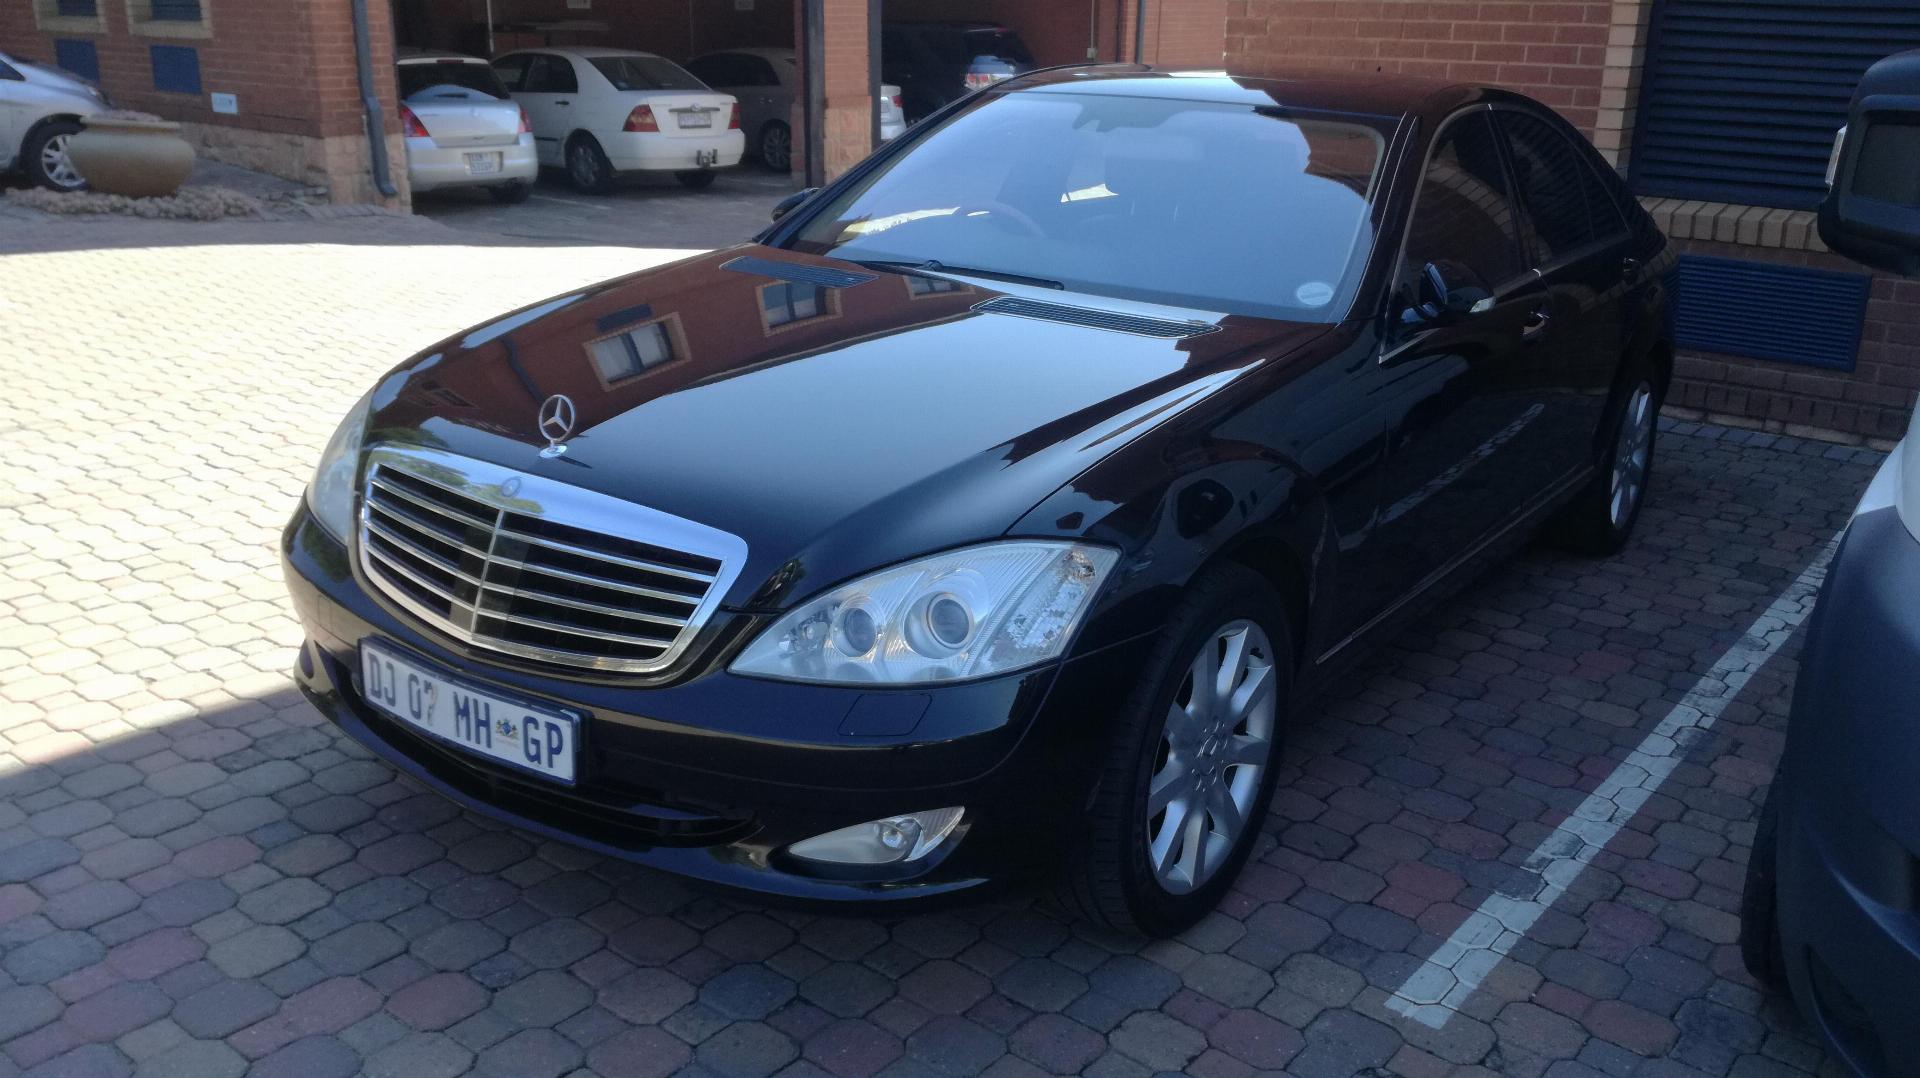 Used Mercedes Benz S Class S500 Auto 2007 on auction - PV1022111